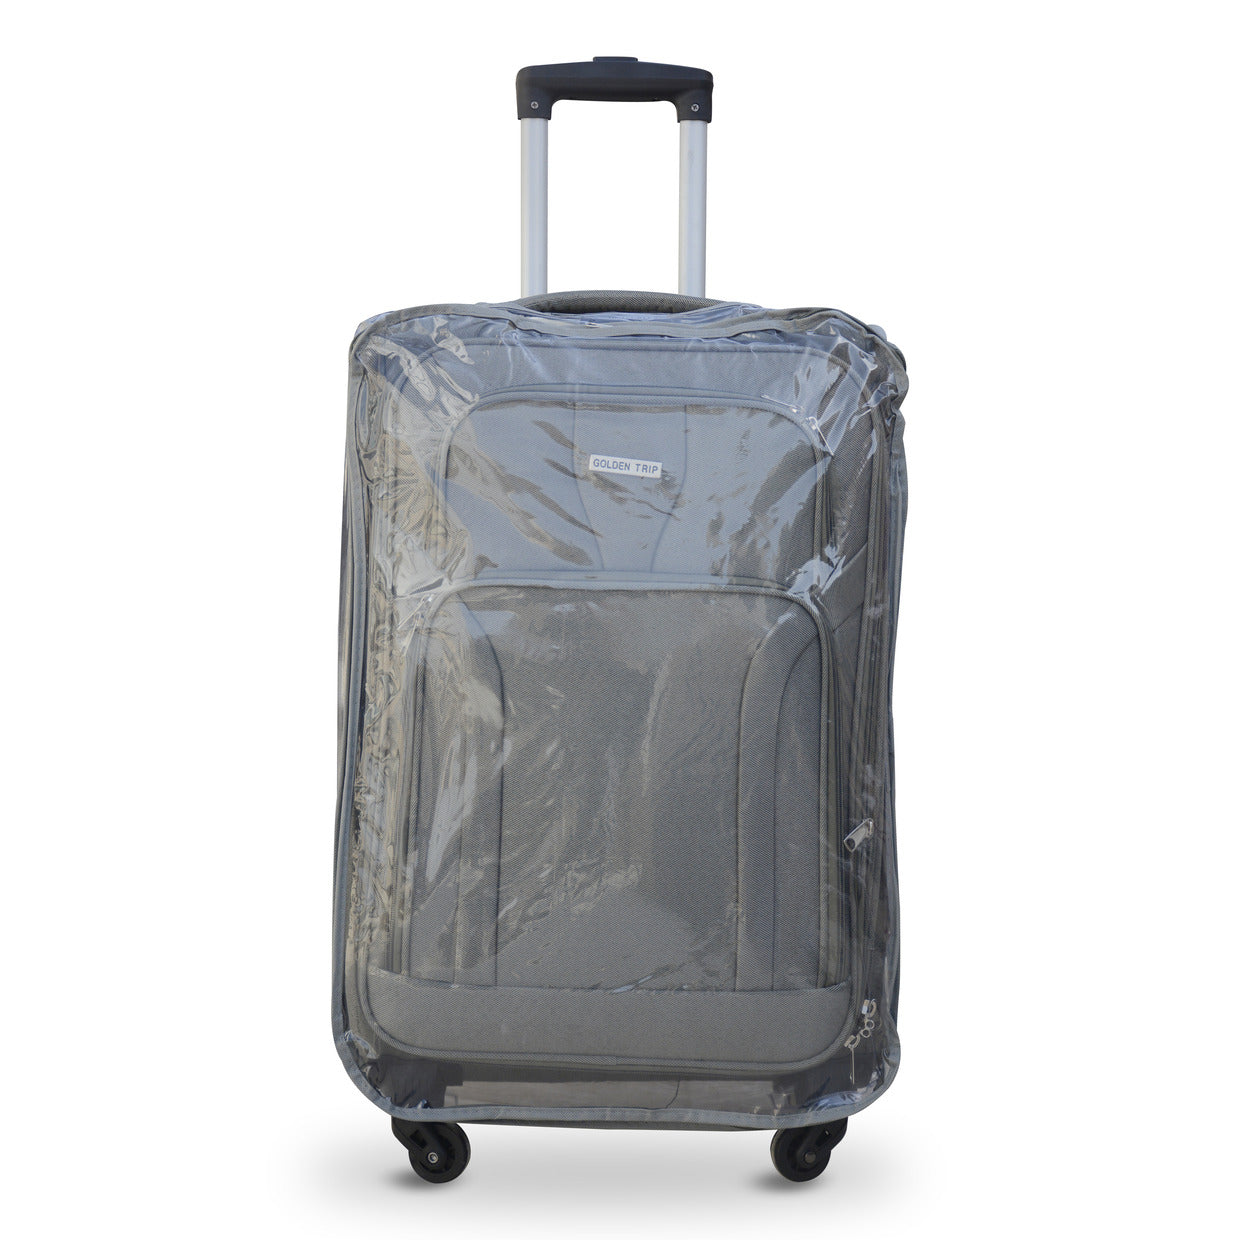 Soft Material 4 Wheel Premium Luggage Bag with Full Cover C1